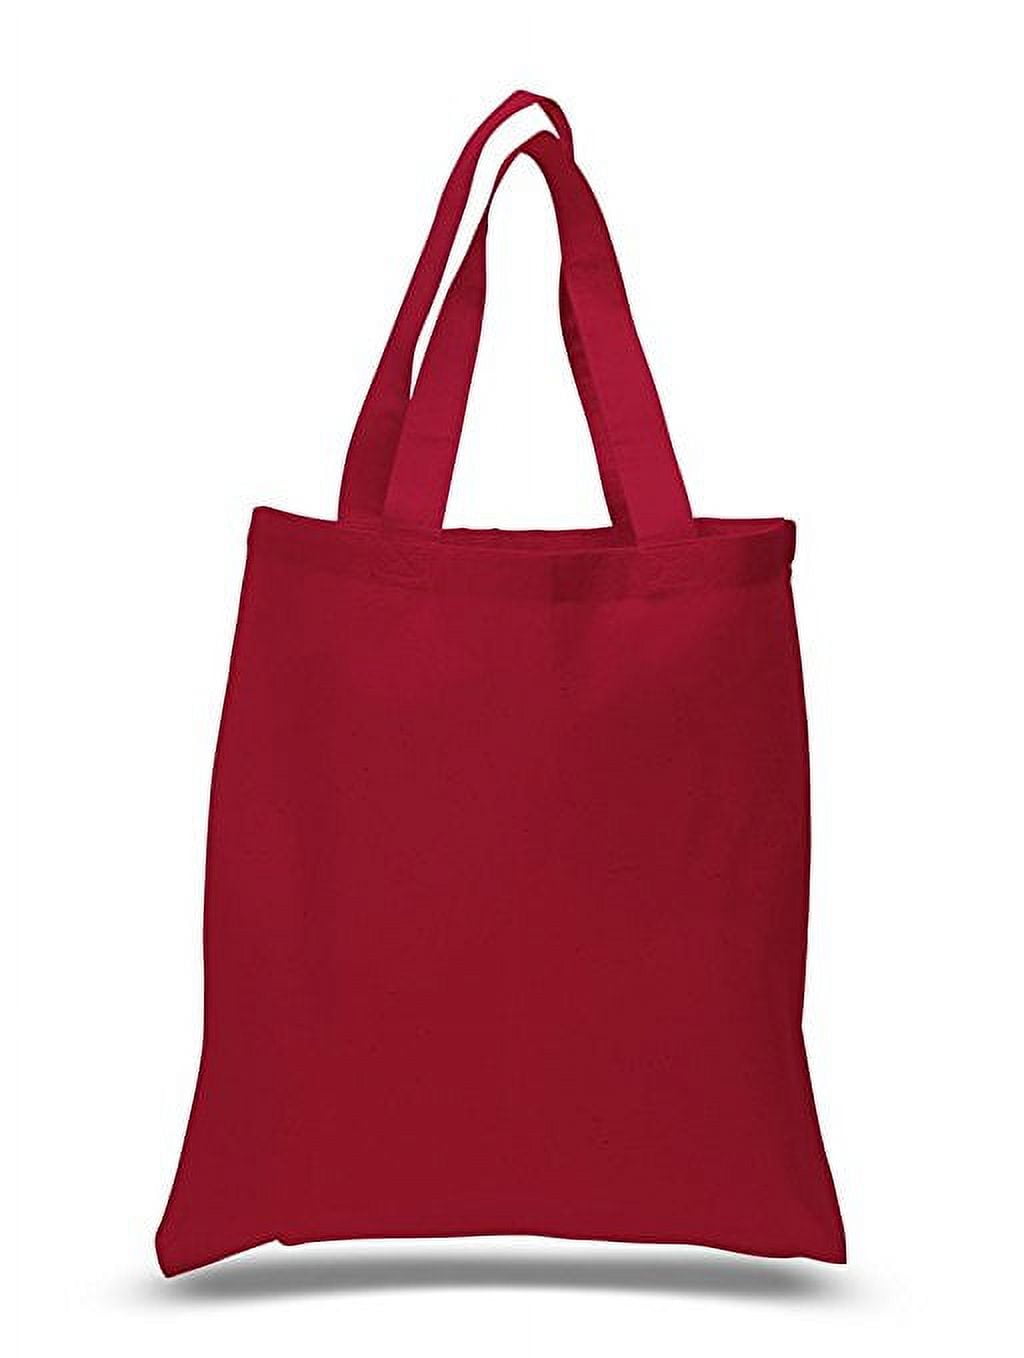 Resuable Blank Tote Bags for DIY, Art & Crafts, Decorations Set of 24 (Red)  